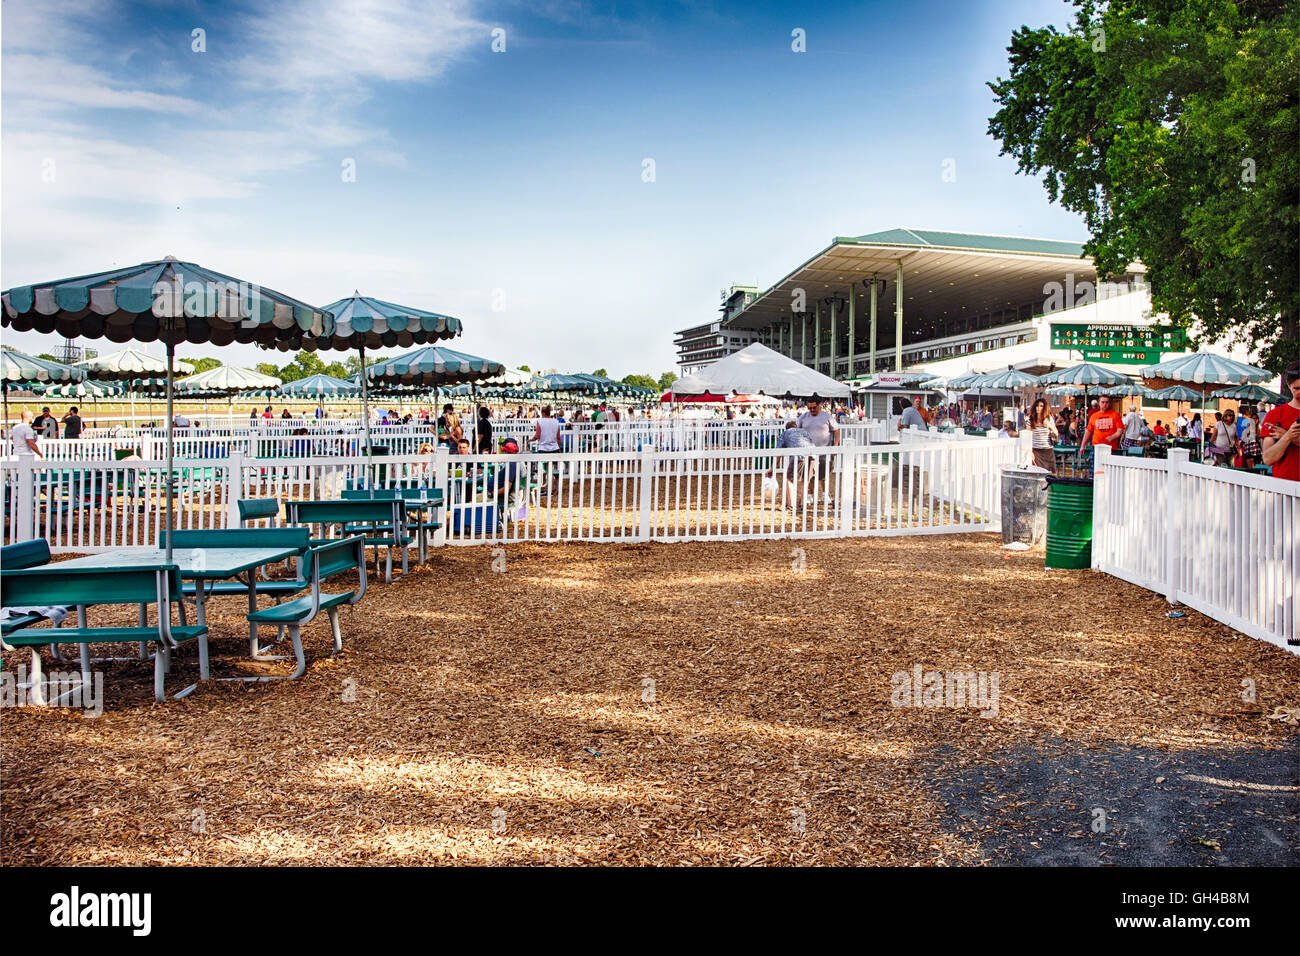 Outdoor Private Boxes with Benches at the Racetrack, Monmouth Park Racetrack Oceanport, New Jersey Stock Photo